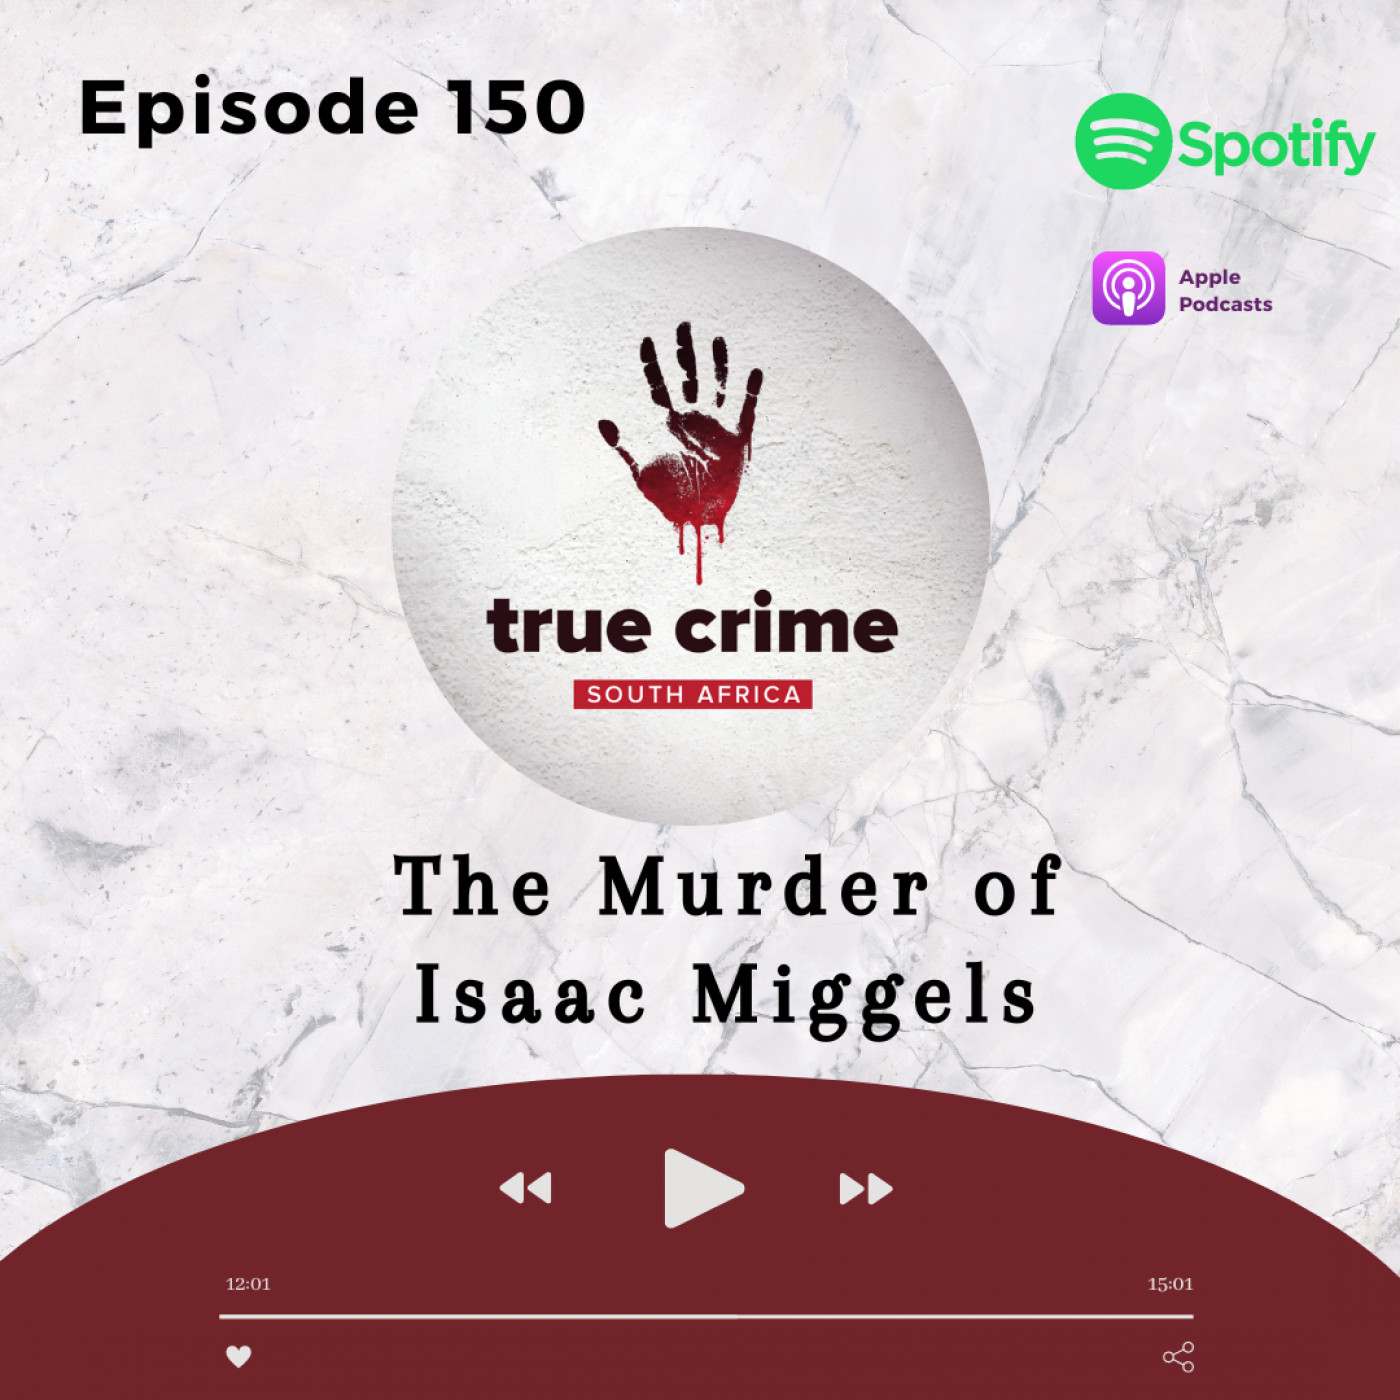 Episode 150 The Murder of Isaac Miggels